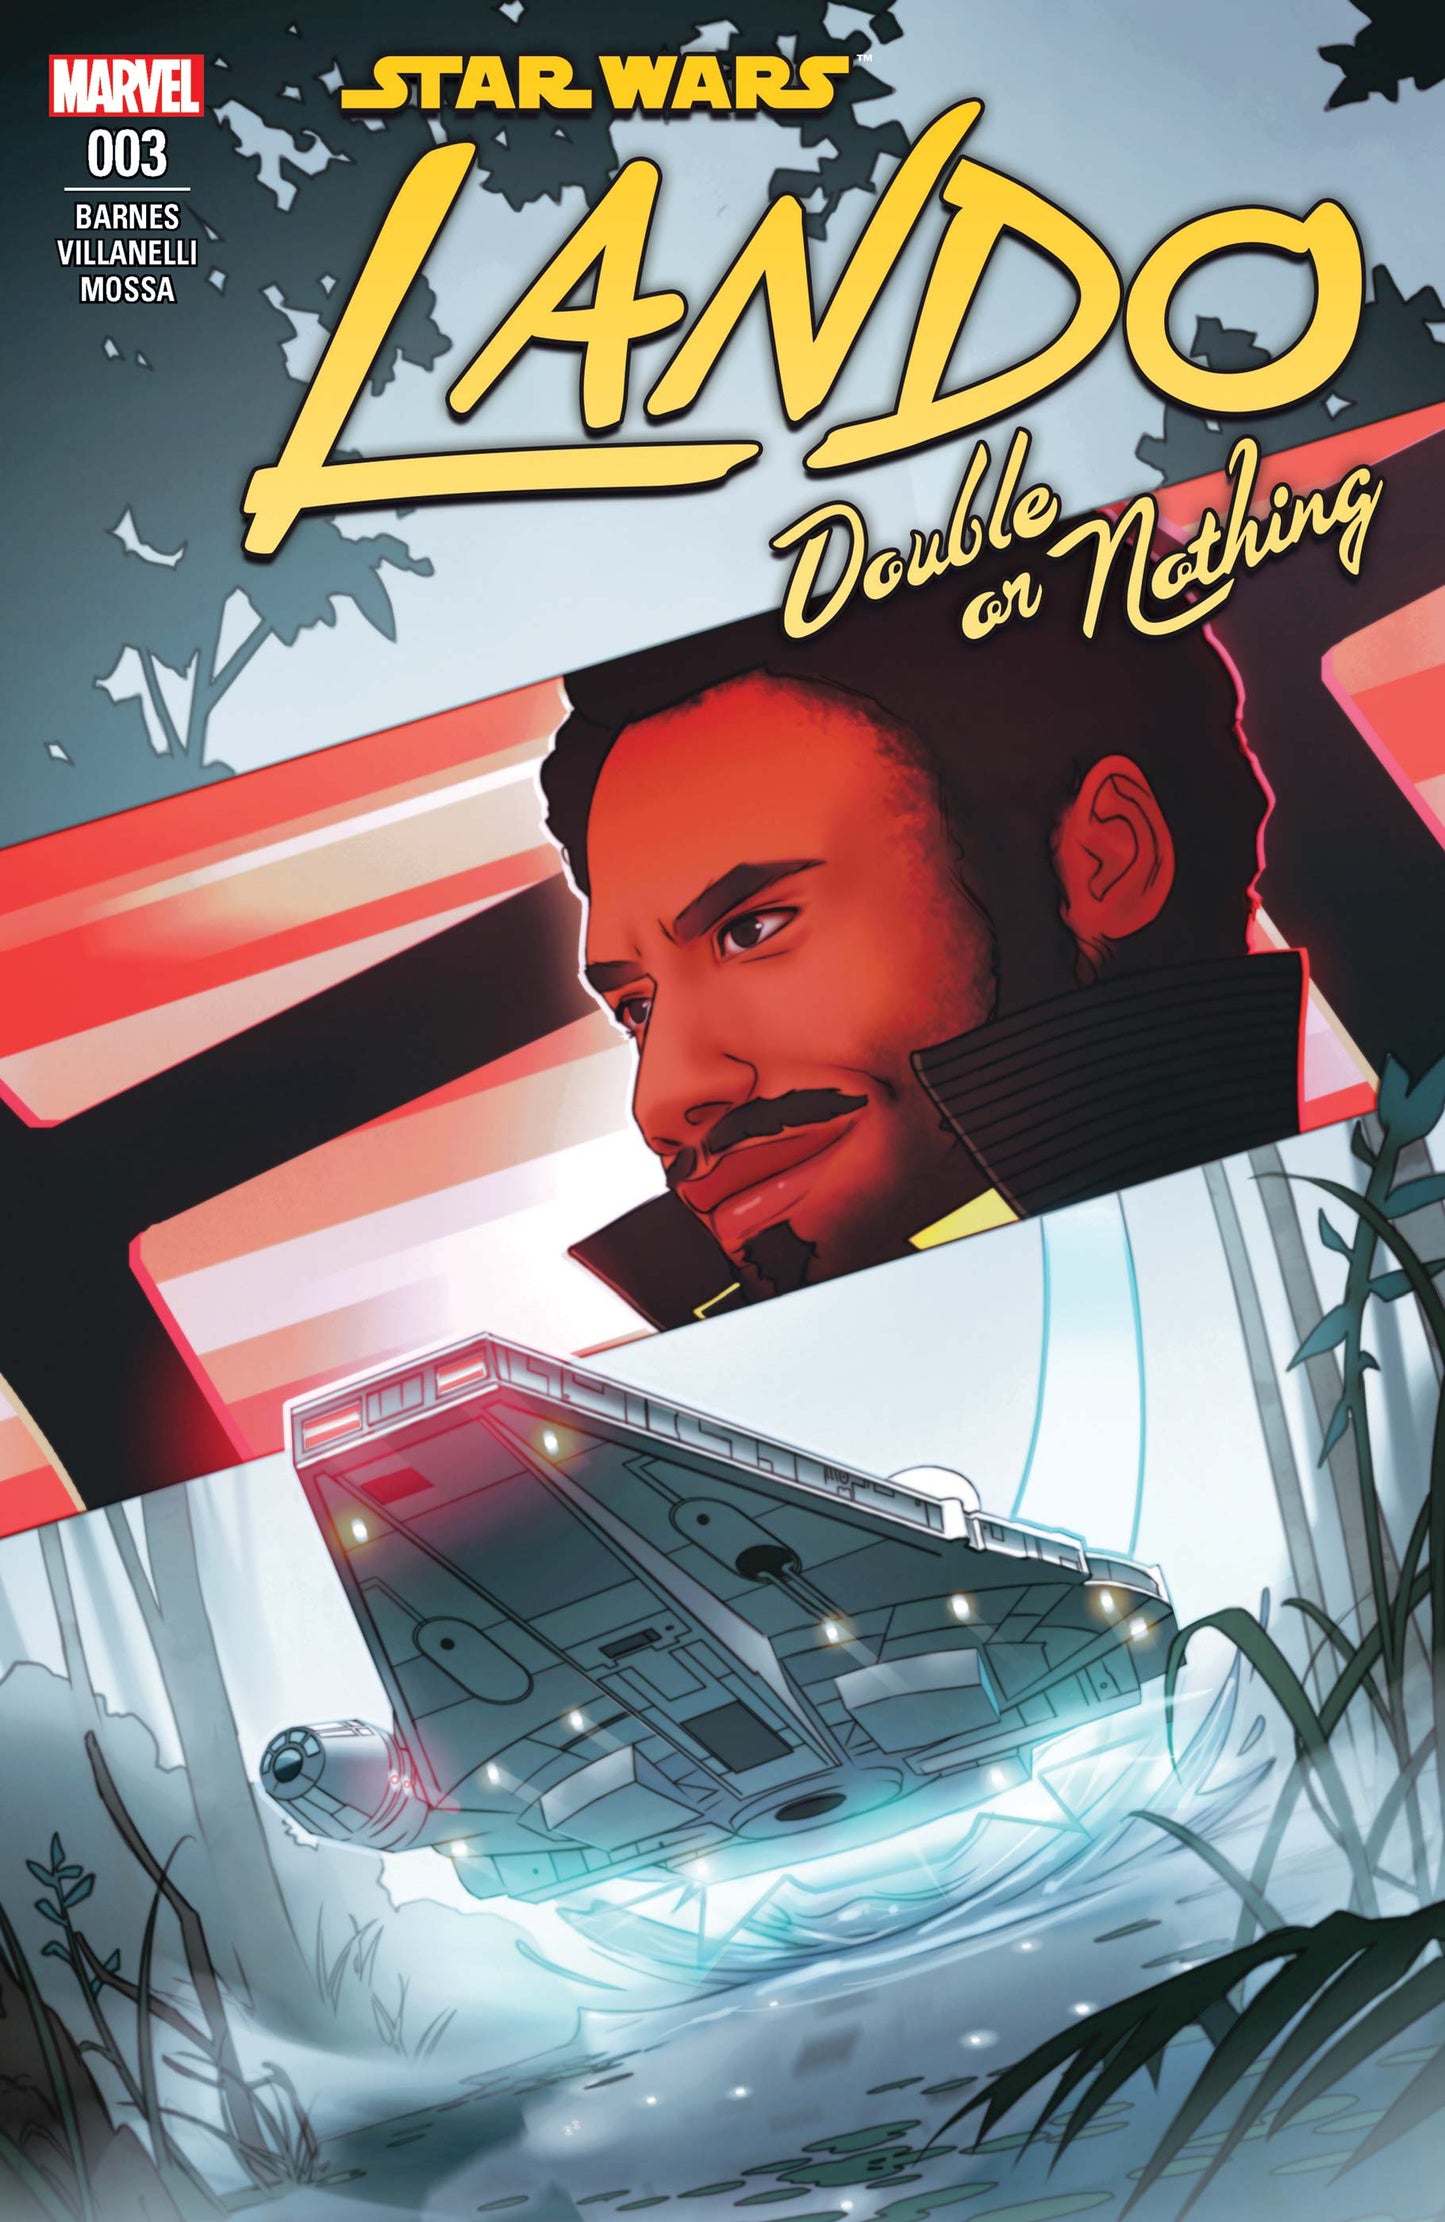 STAR WARS LANDO DOUBLE OR NOTHING #3 A (OF 5) Scott Forbes Rodney Barnes (07/25/2018) Marvel